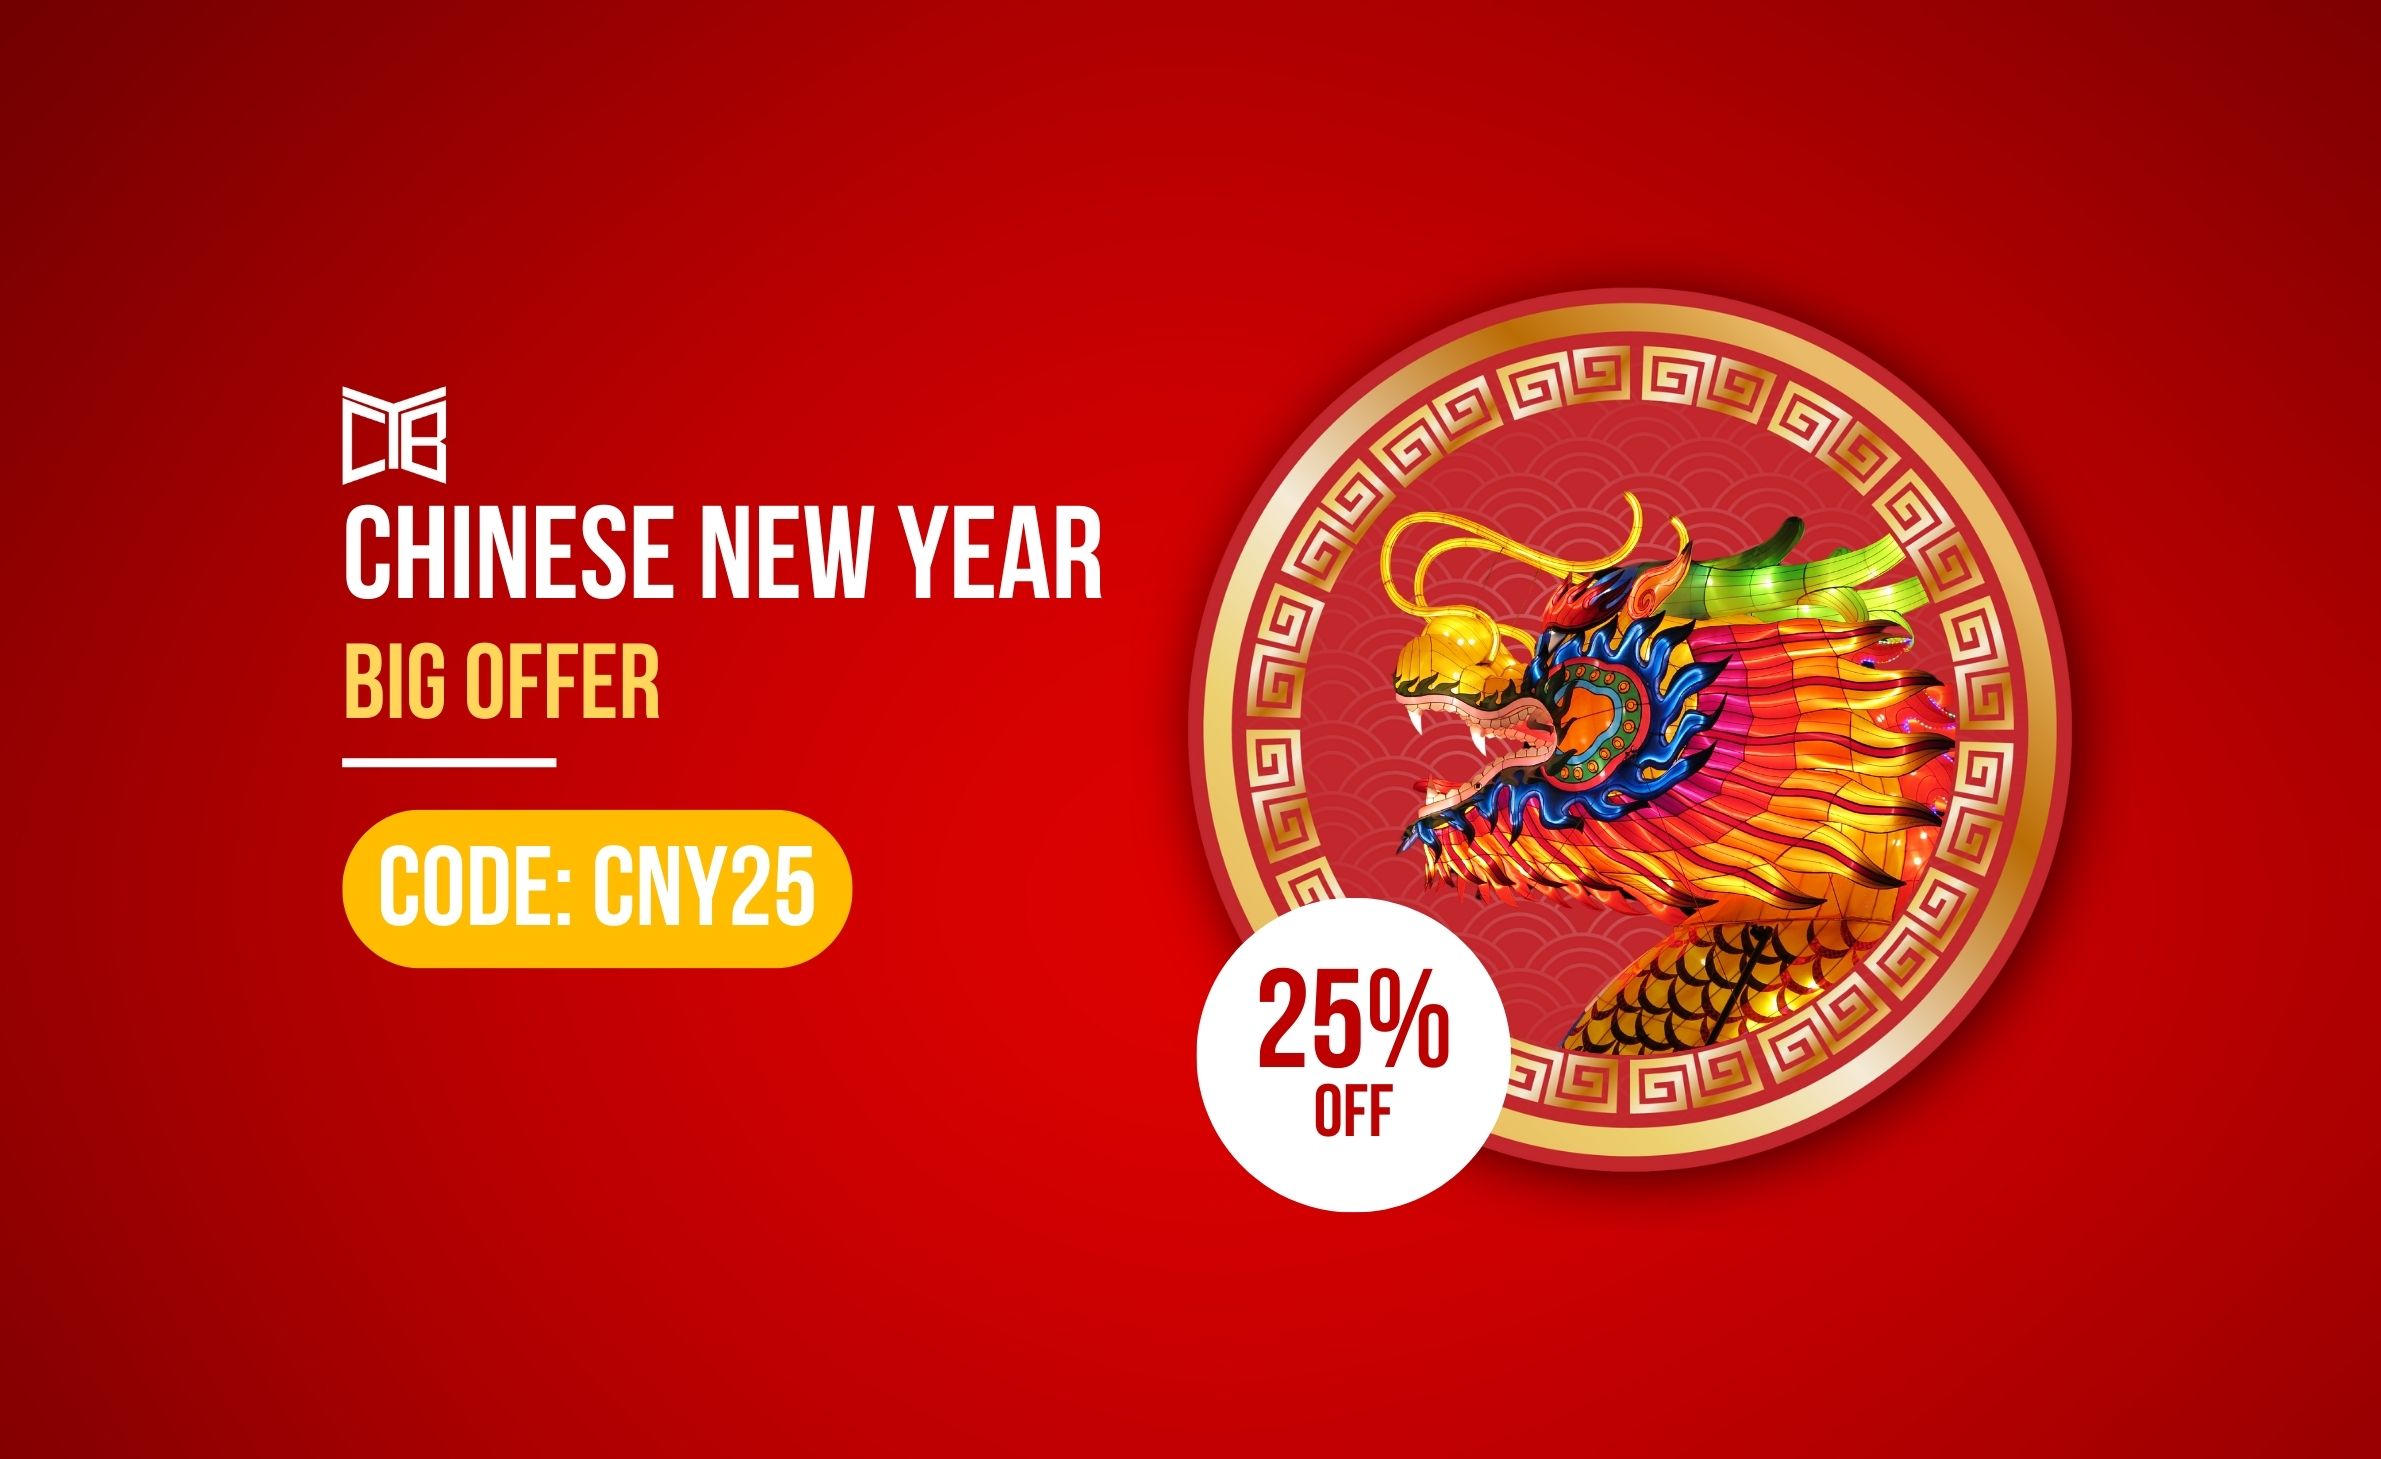 Chinese New Year Big Offer: Save 25% Now!